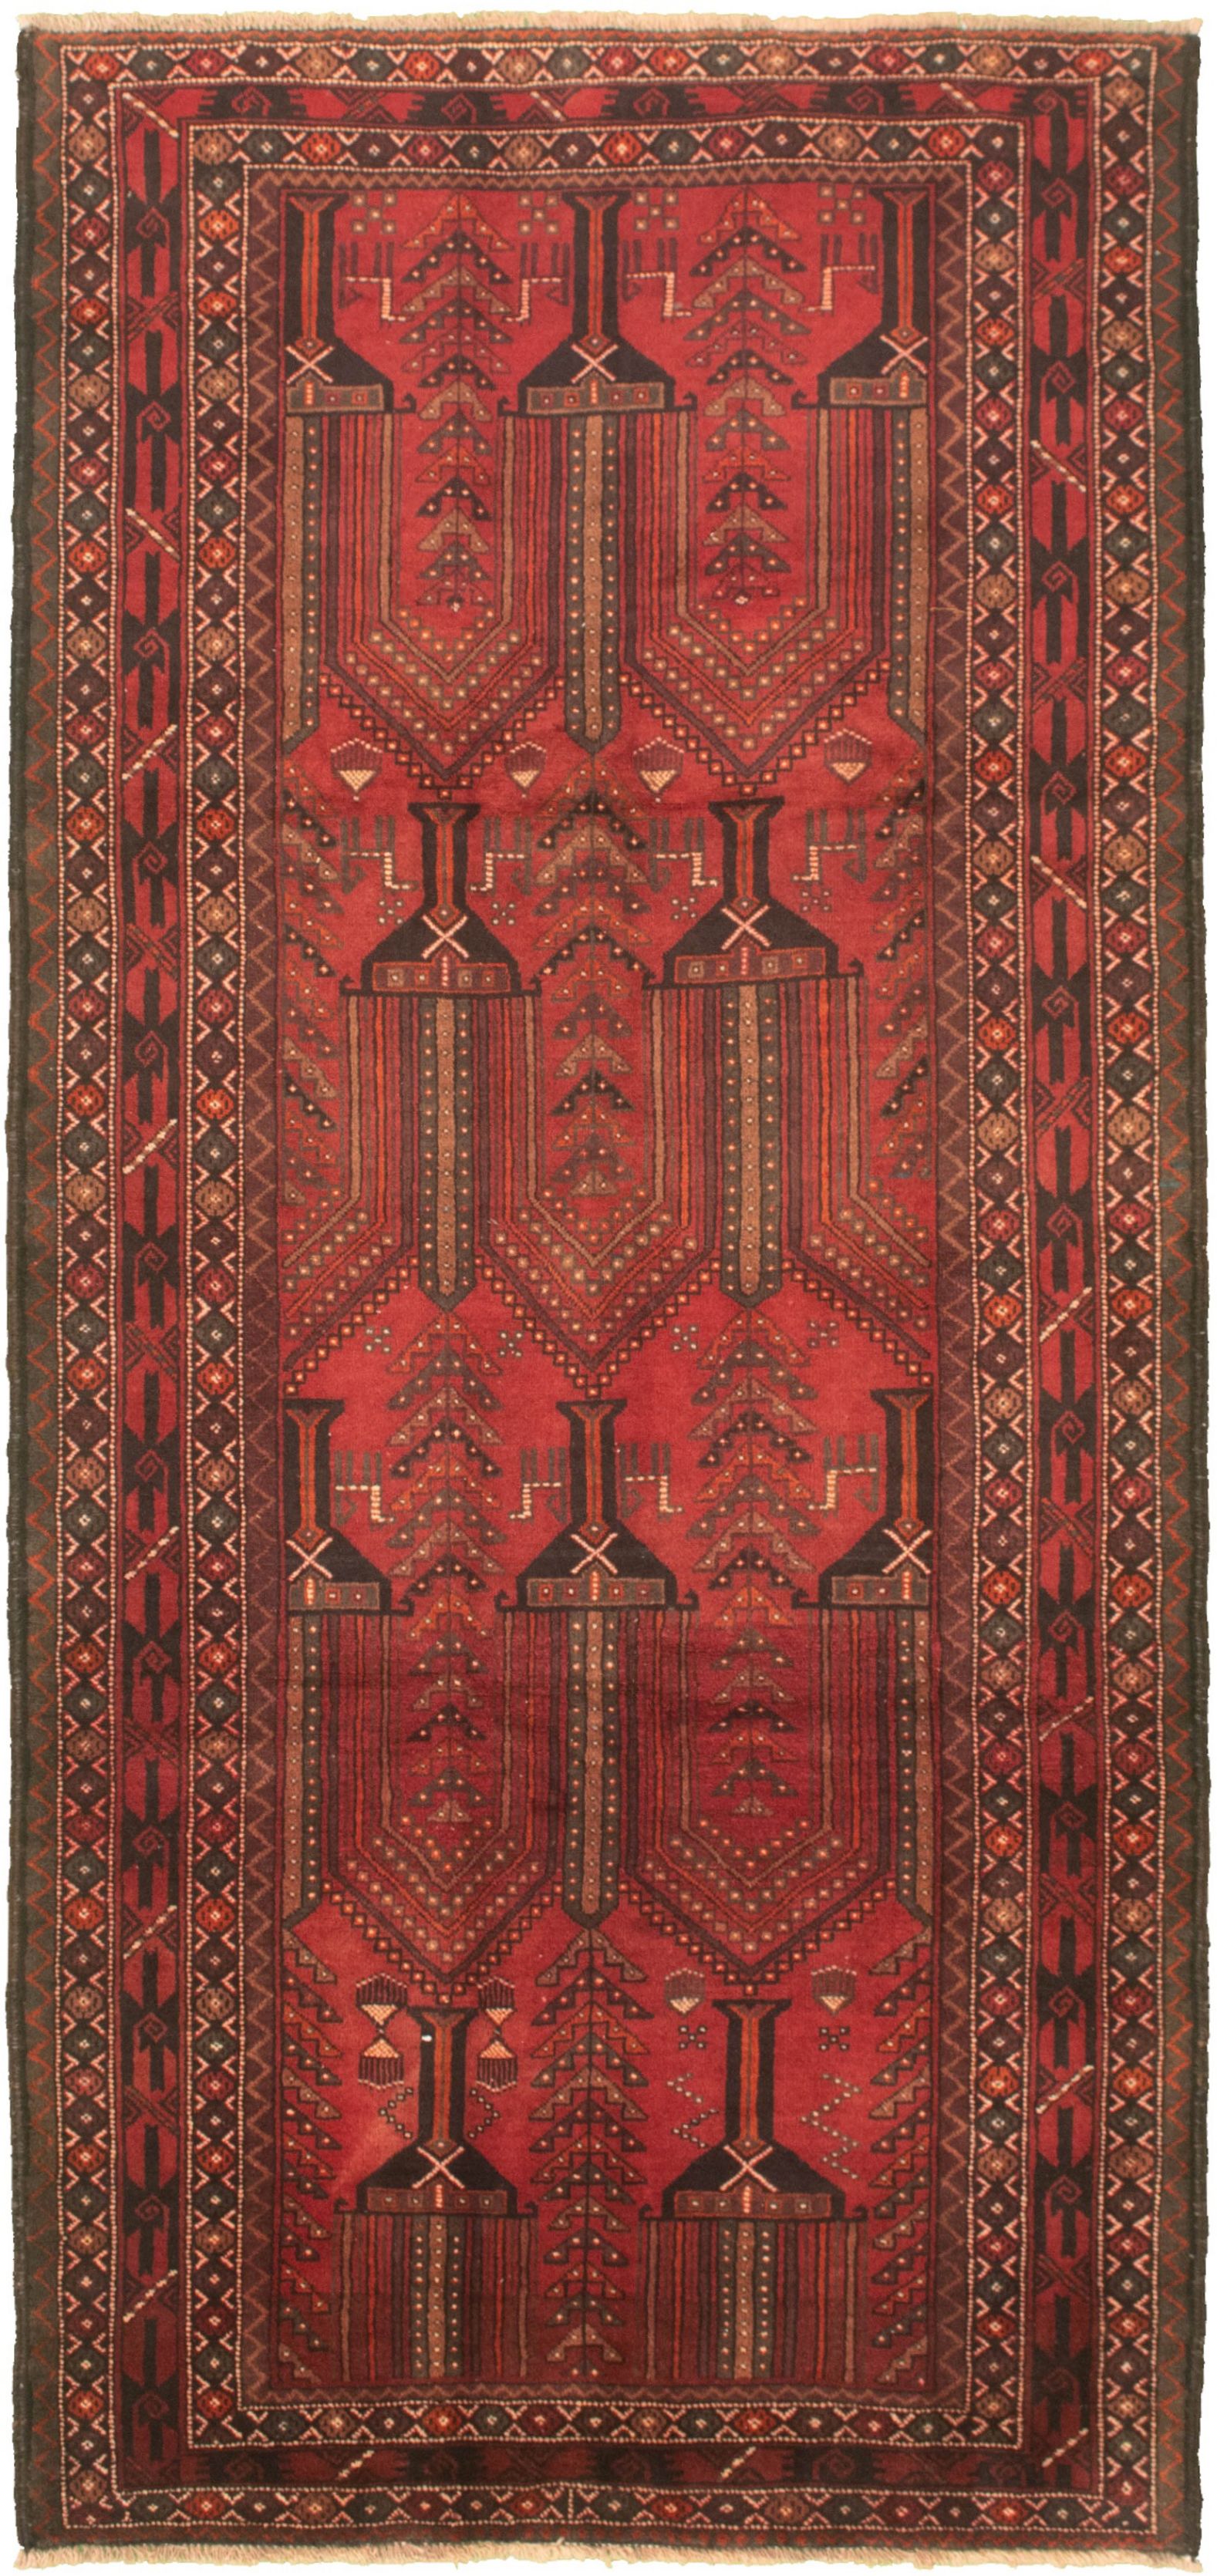 Hand-knotted Authentic Turkish Red Wool Rug 4'3" x 7'3" Size: 4'3" x 7'3"  